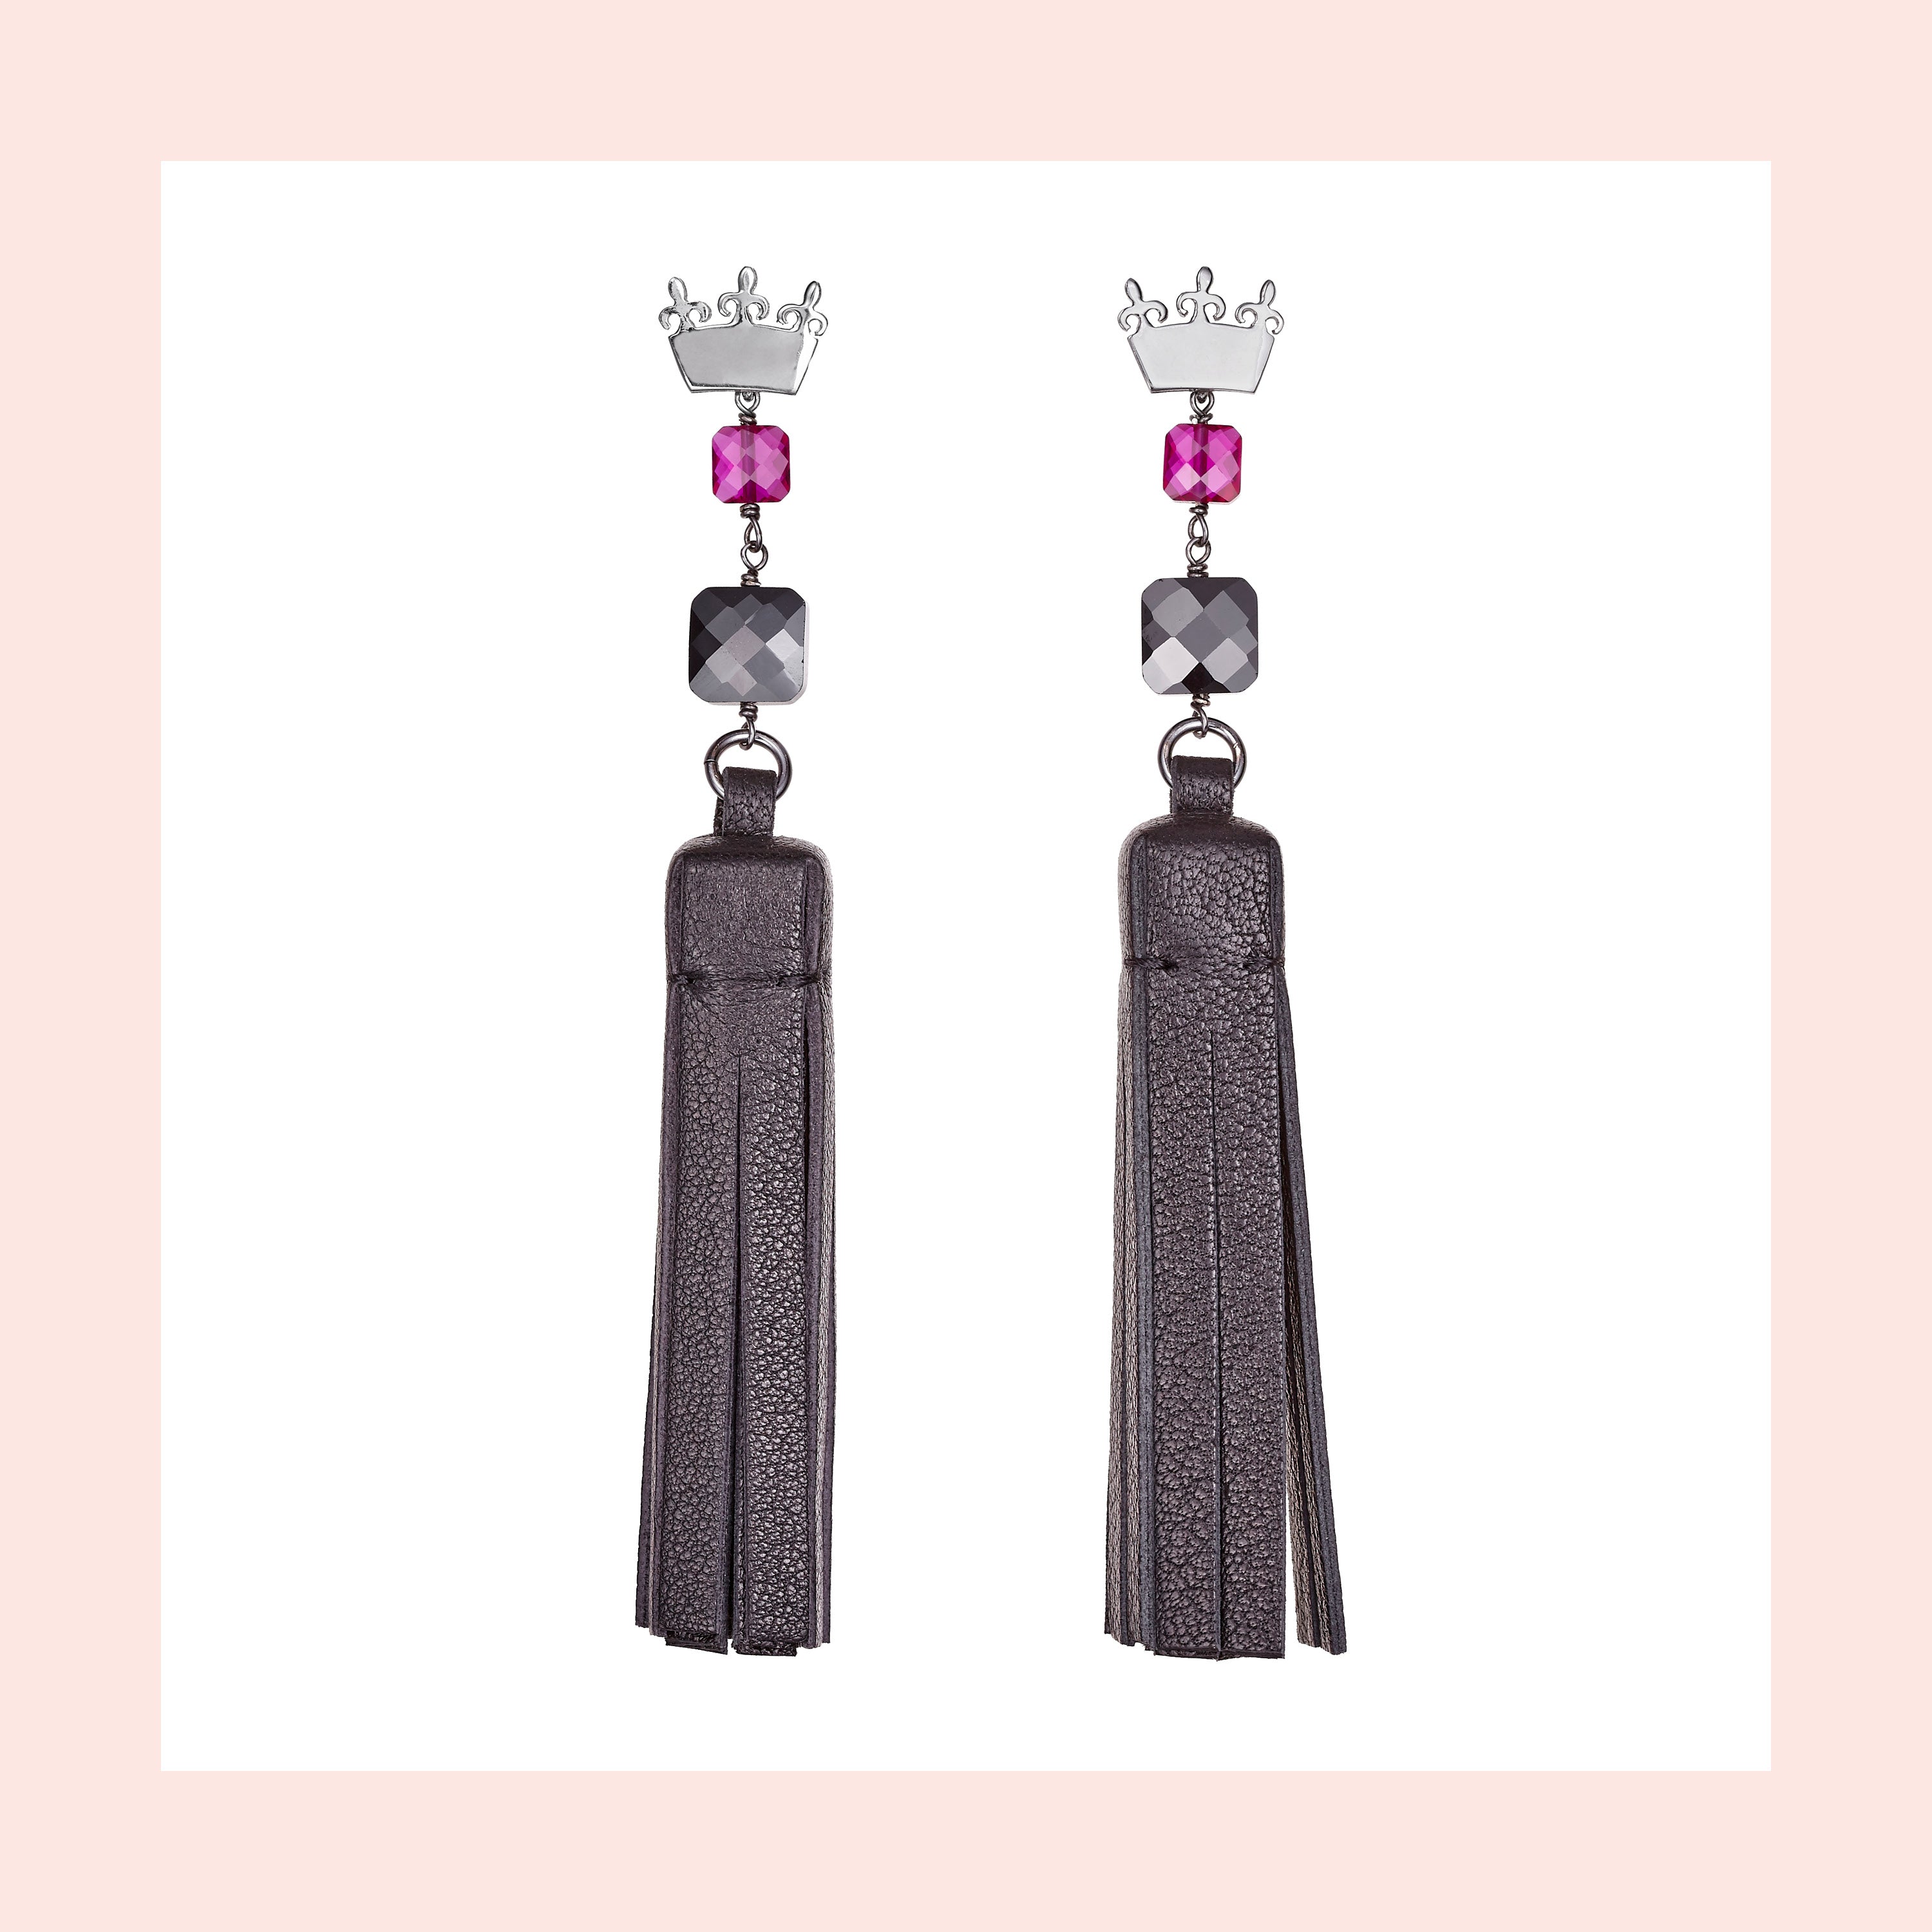 Tassel “Square” Earrings with Black Leather and Zircons